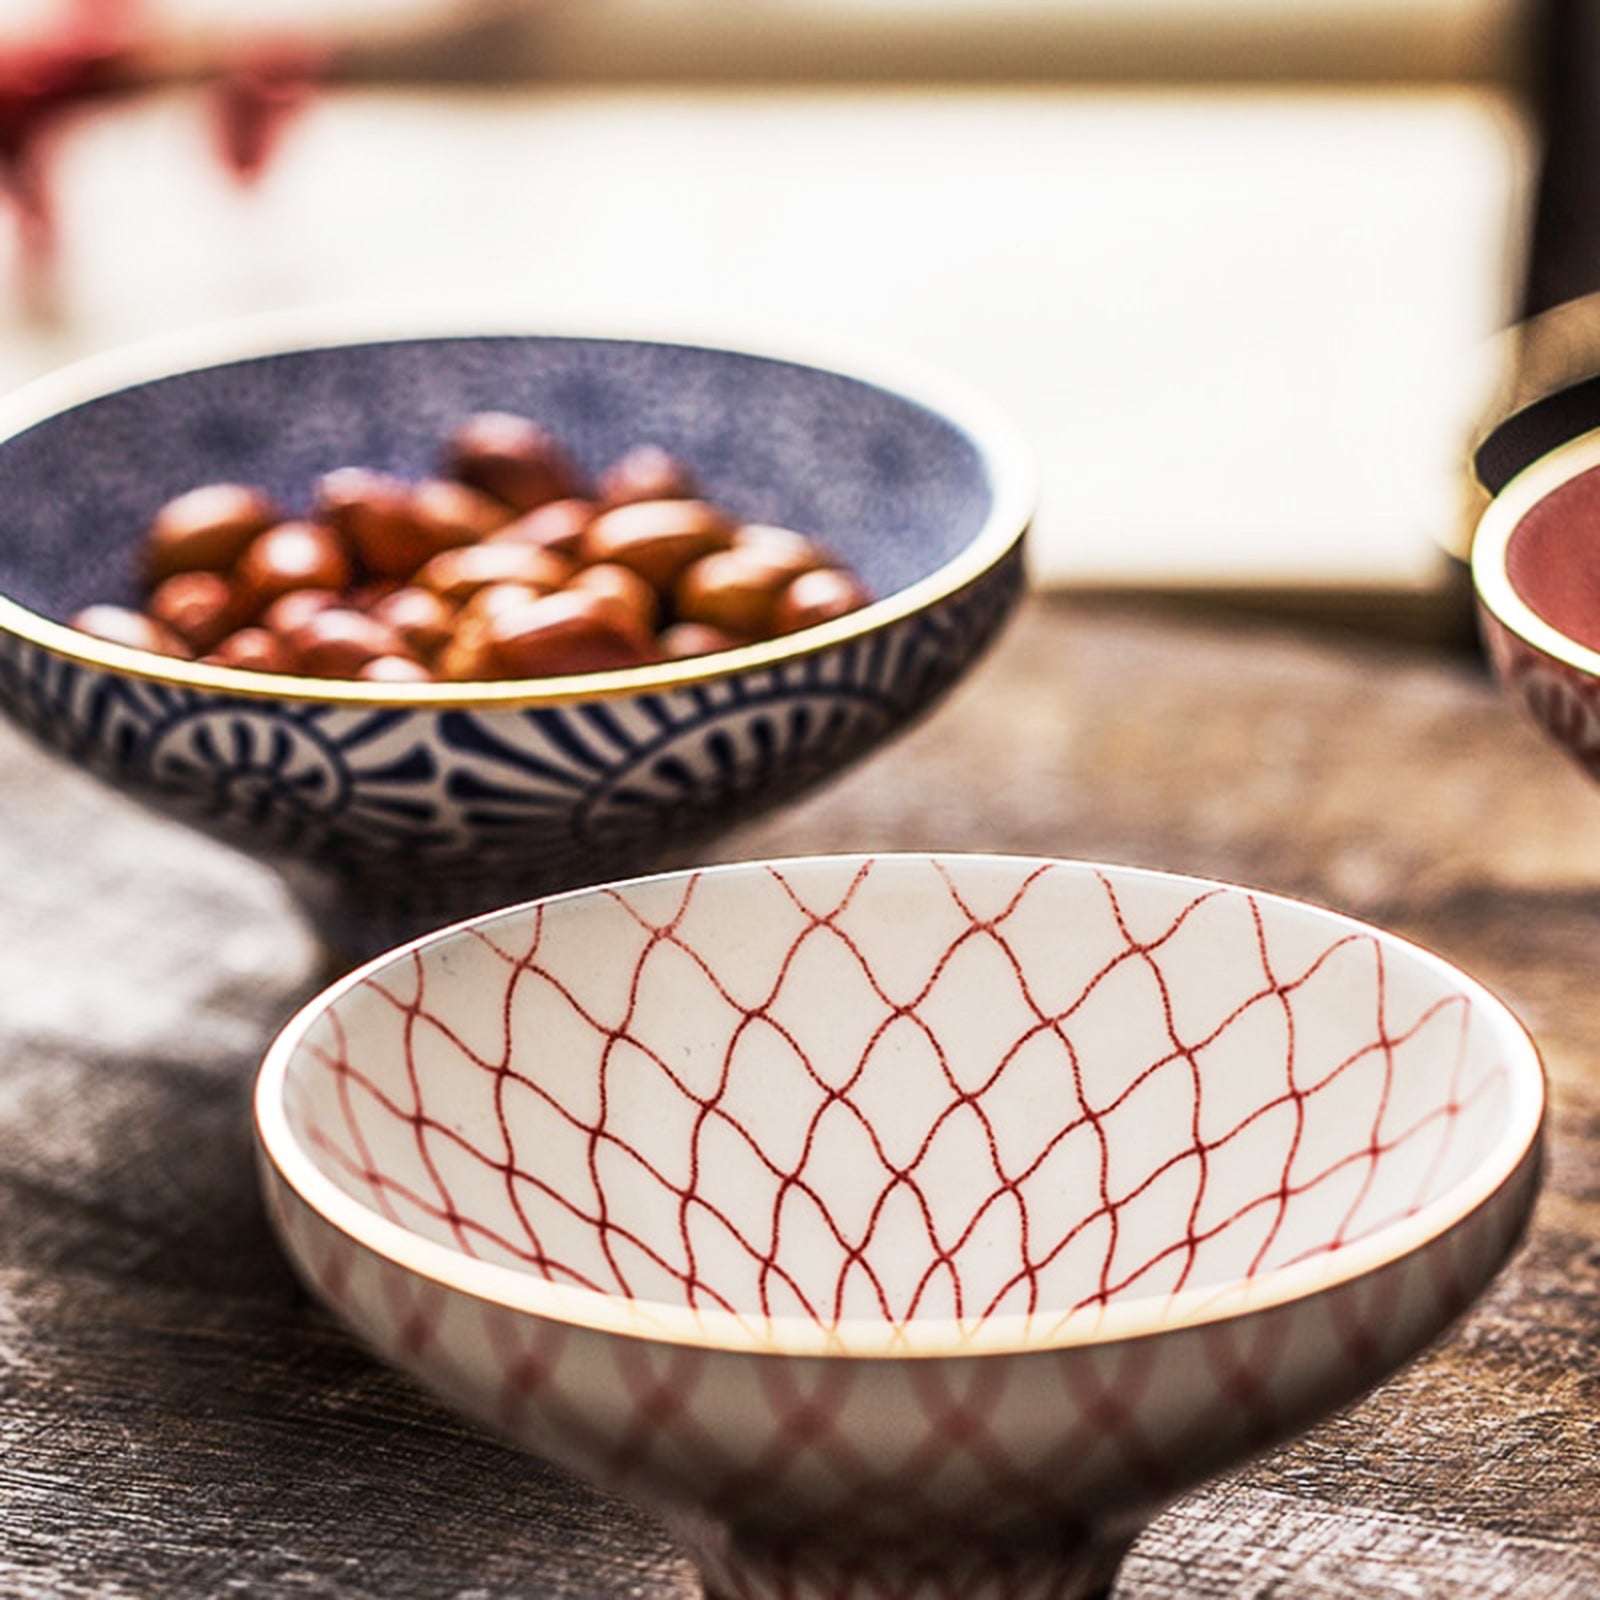 Modern Ceramic Bowls: Infuse Style into Every Meal